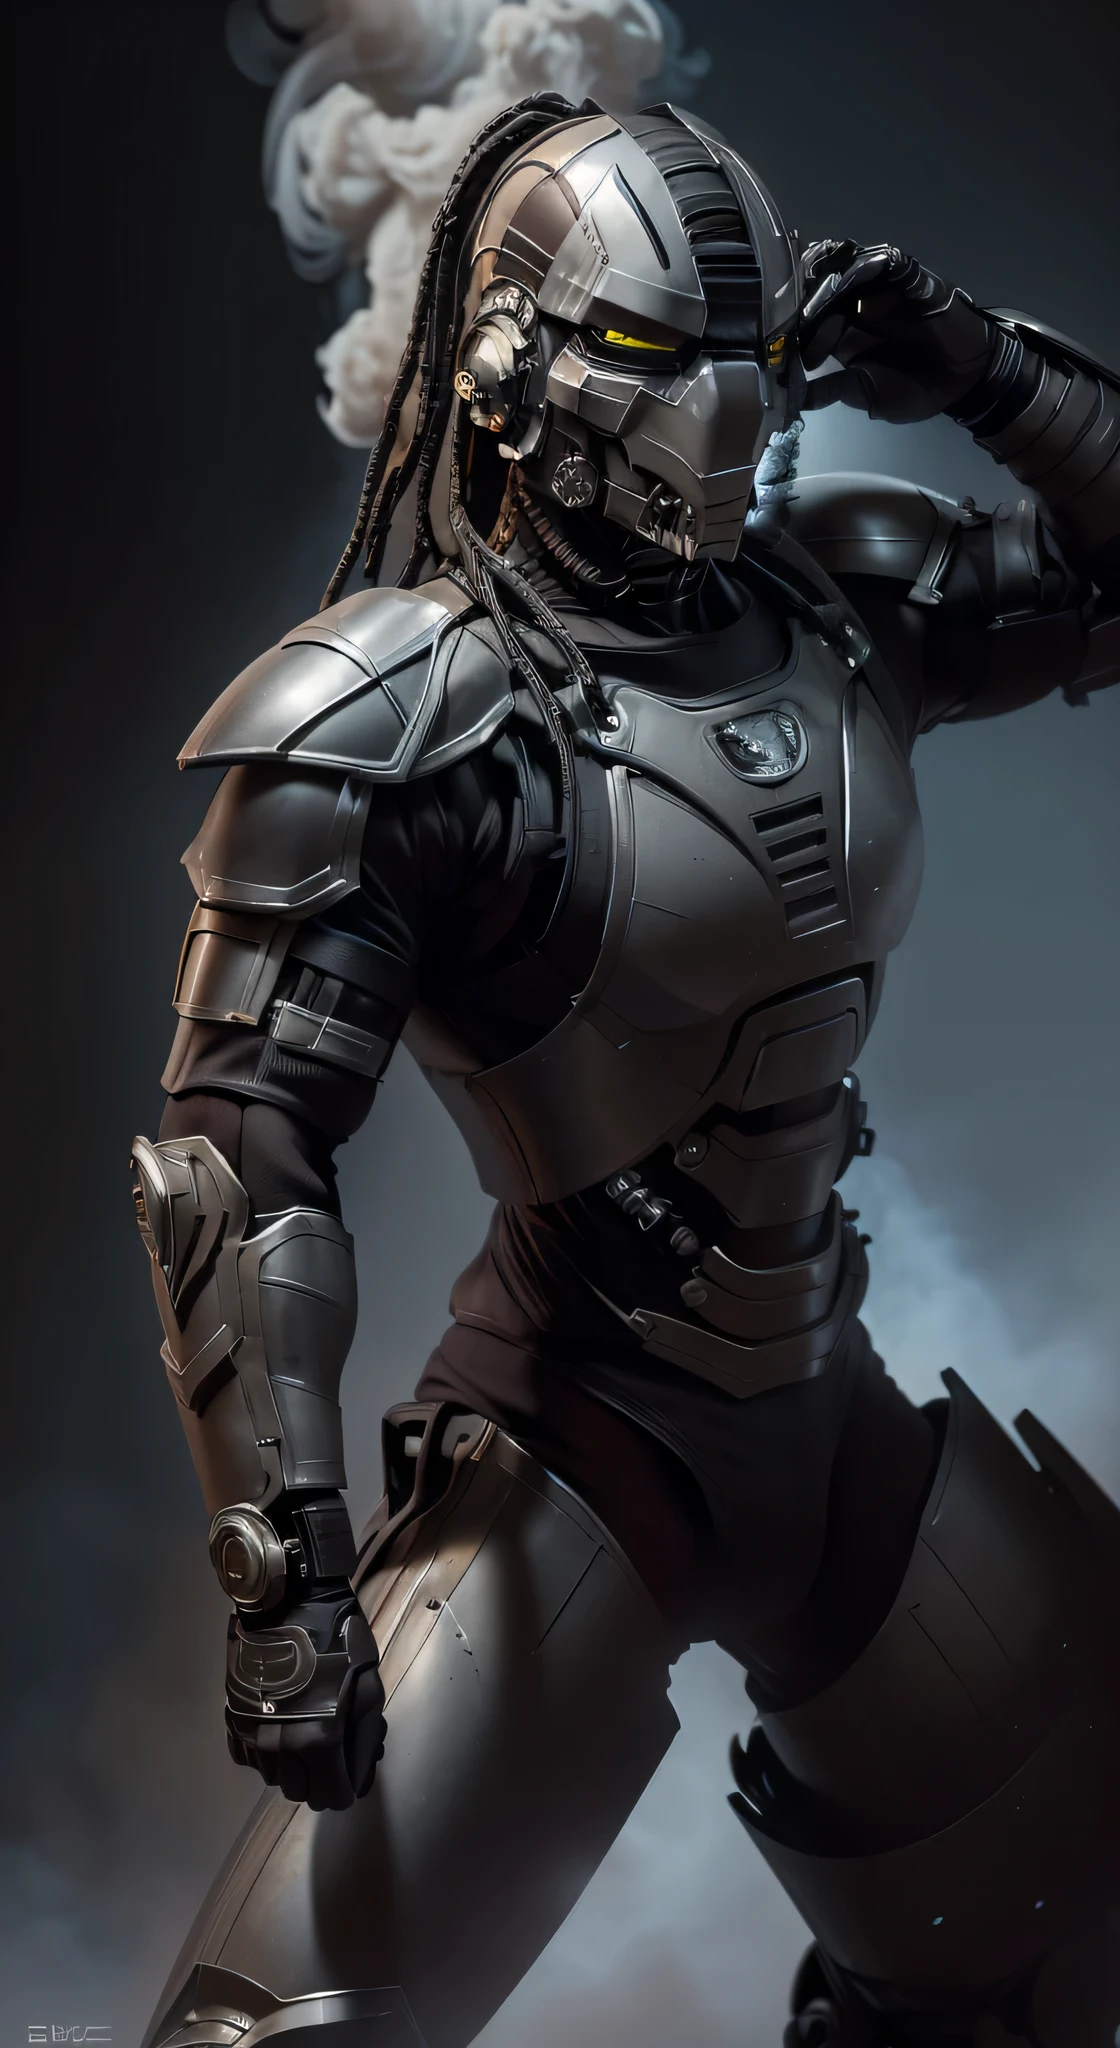 zxcrx, cyborg ninja wearing sleek, (grey and black armour:1.5) that incorporates various mechanical components, his face is covered by a helmet with a (black visor:1.3), arm-mounted blades, energy-based weaponry, ((smoke on background:1.4)), intricate, high detail, sharp focus, dramatic, photorealistic painting art by greg rutkowski